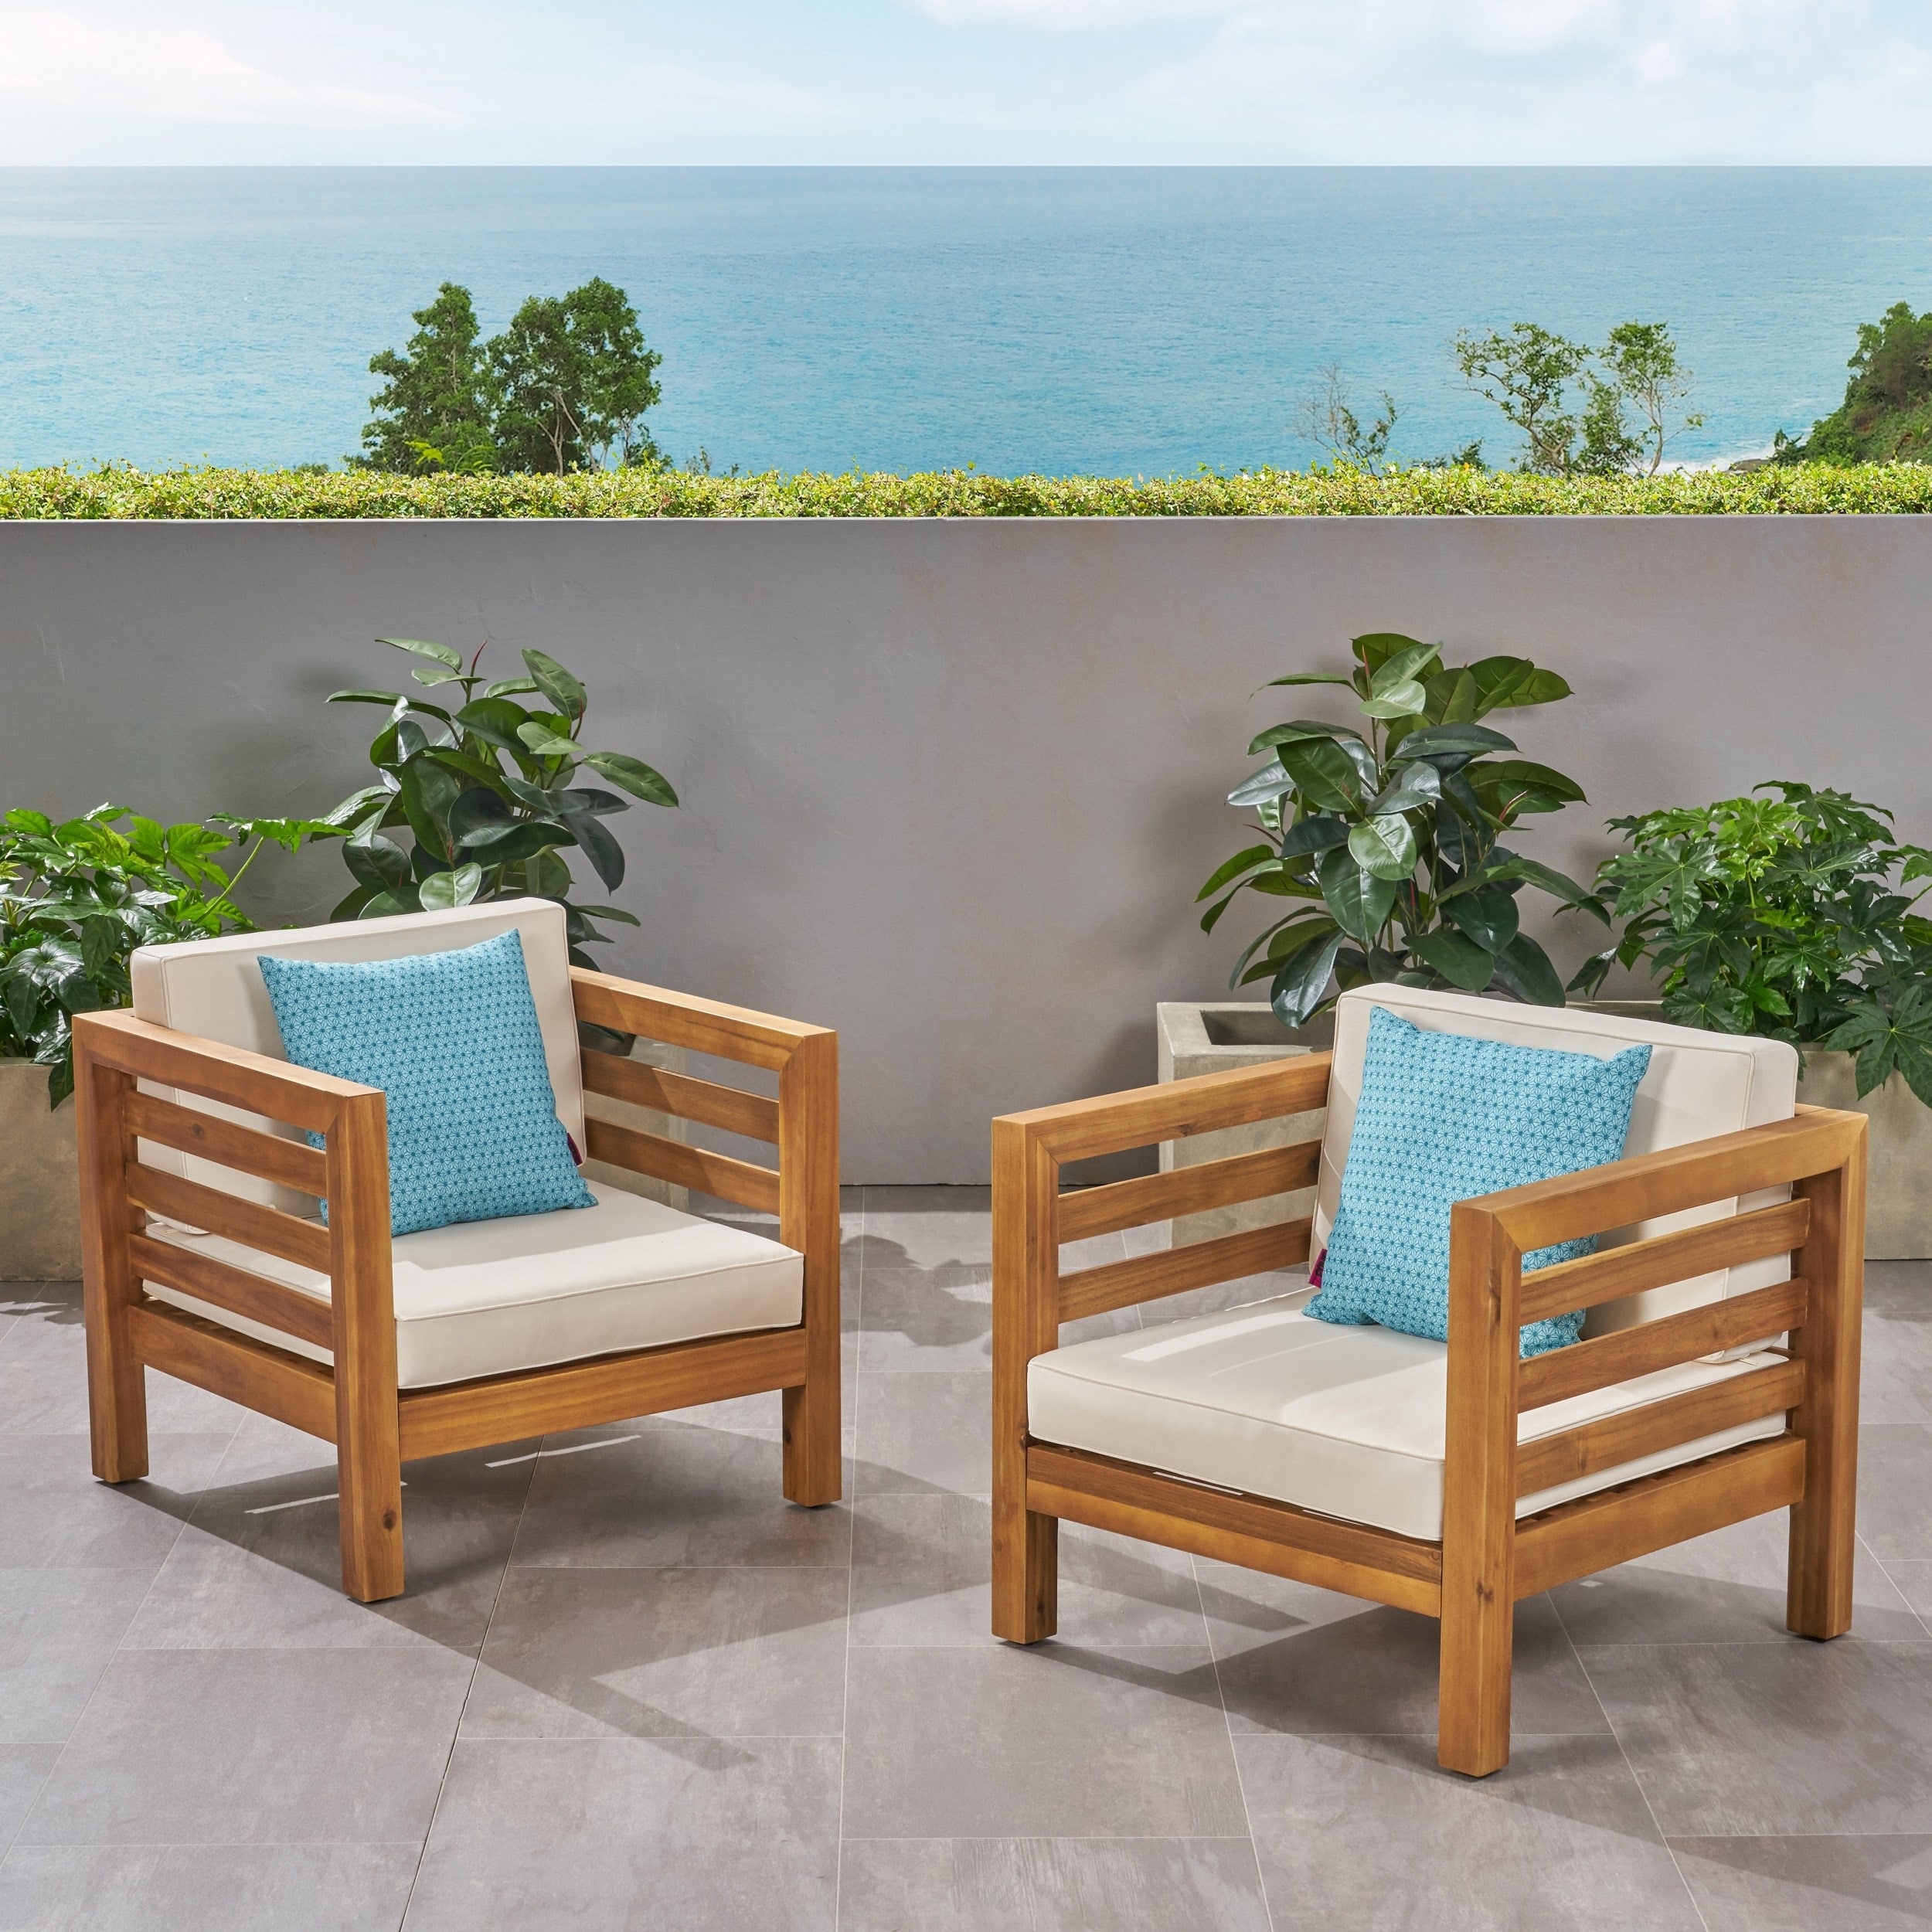 Choosing the Most Durable Wood for Outdoor Furniture - Today's Homeowner